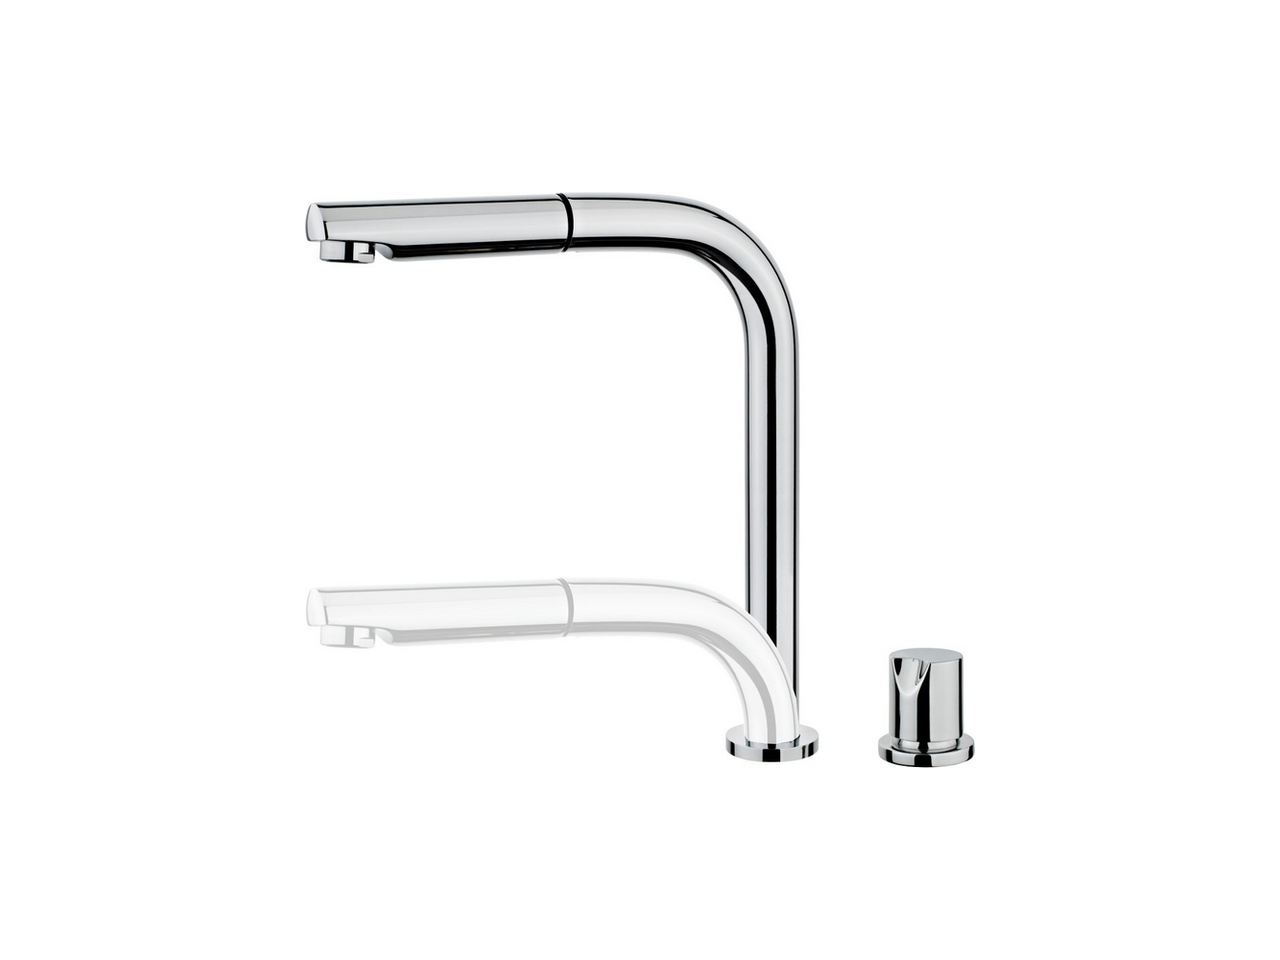 CisalSingle lever sink mixer with reclined spout KITCHEN_LC000090